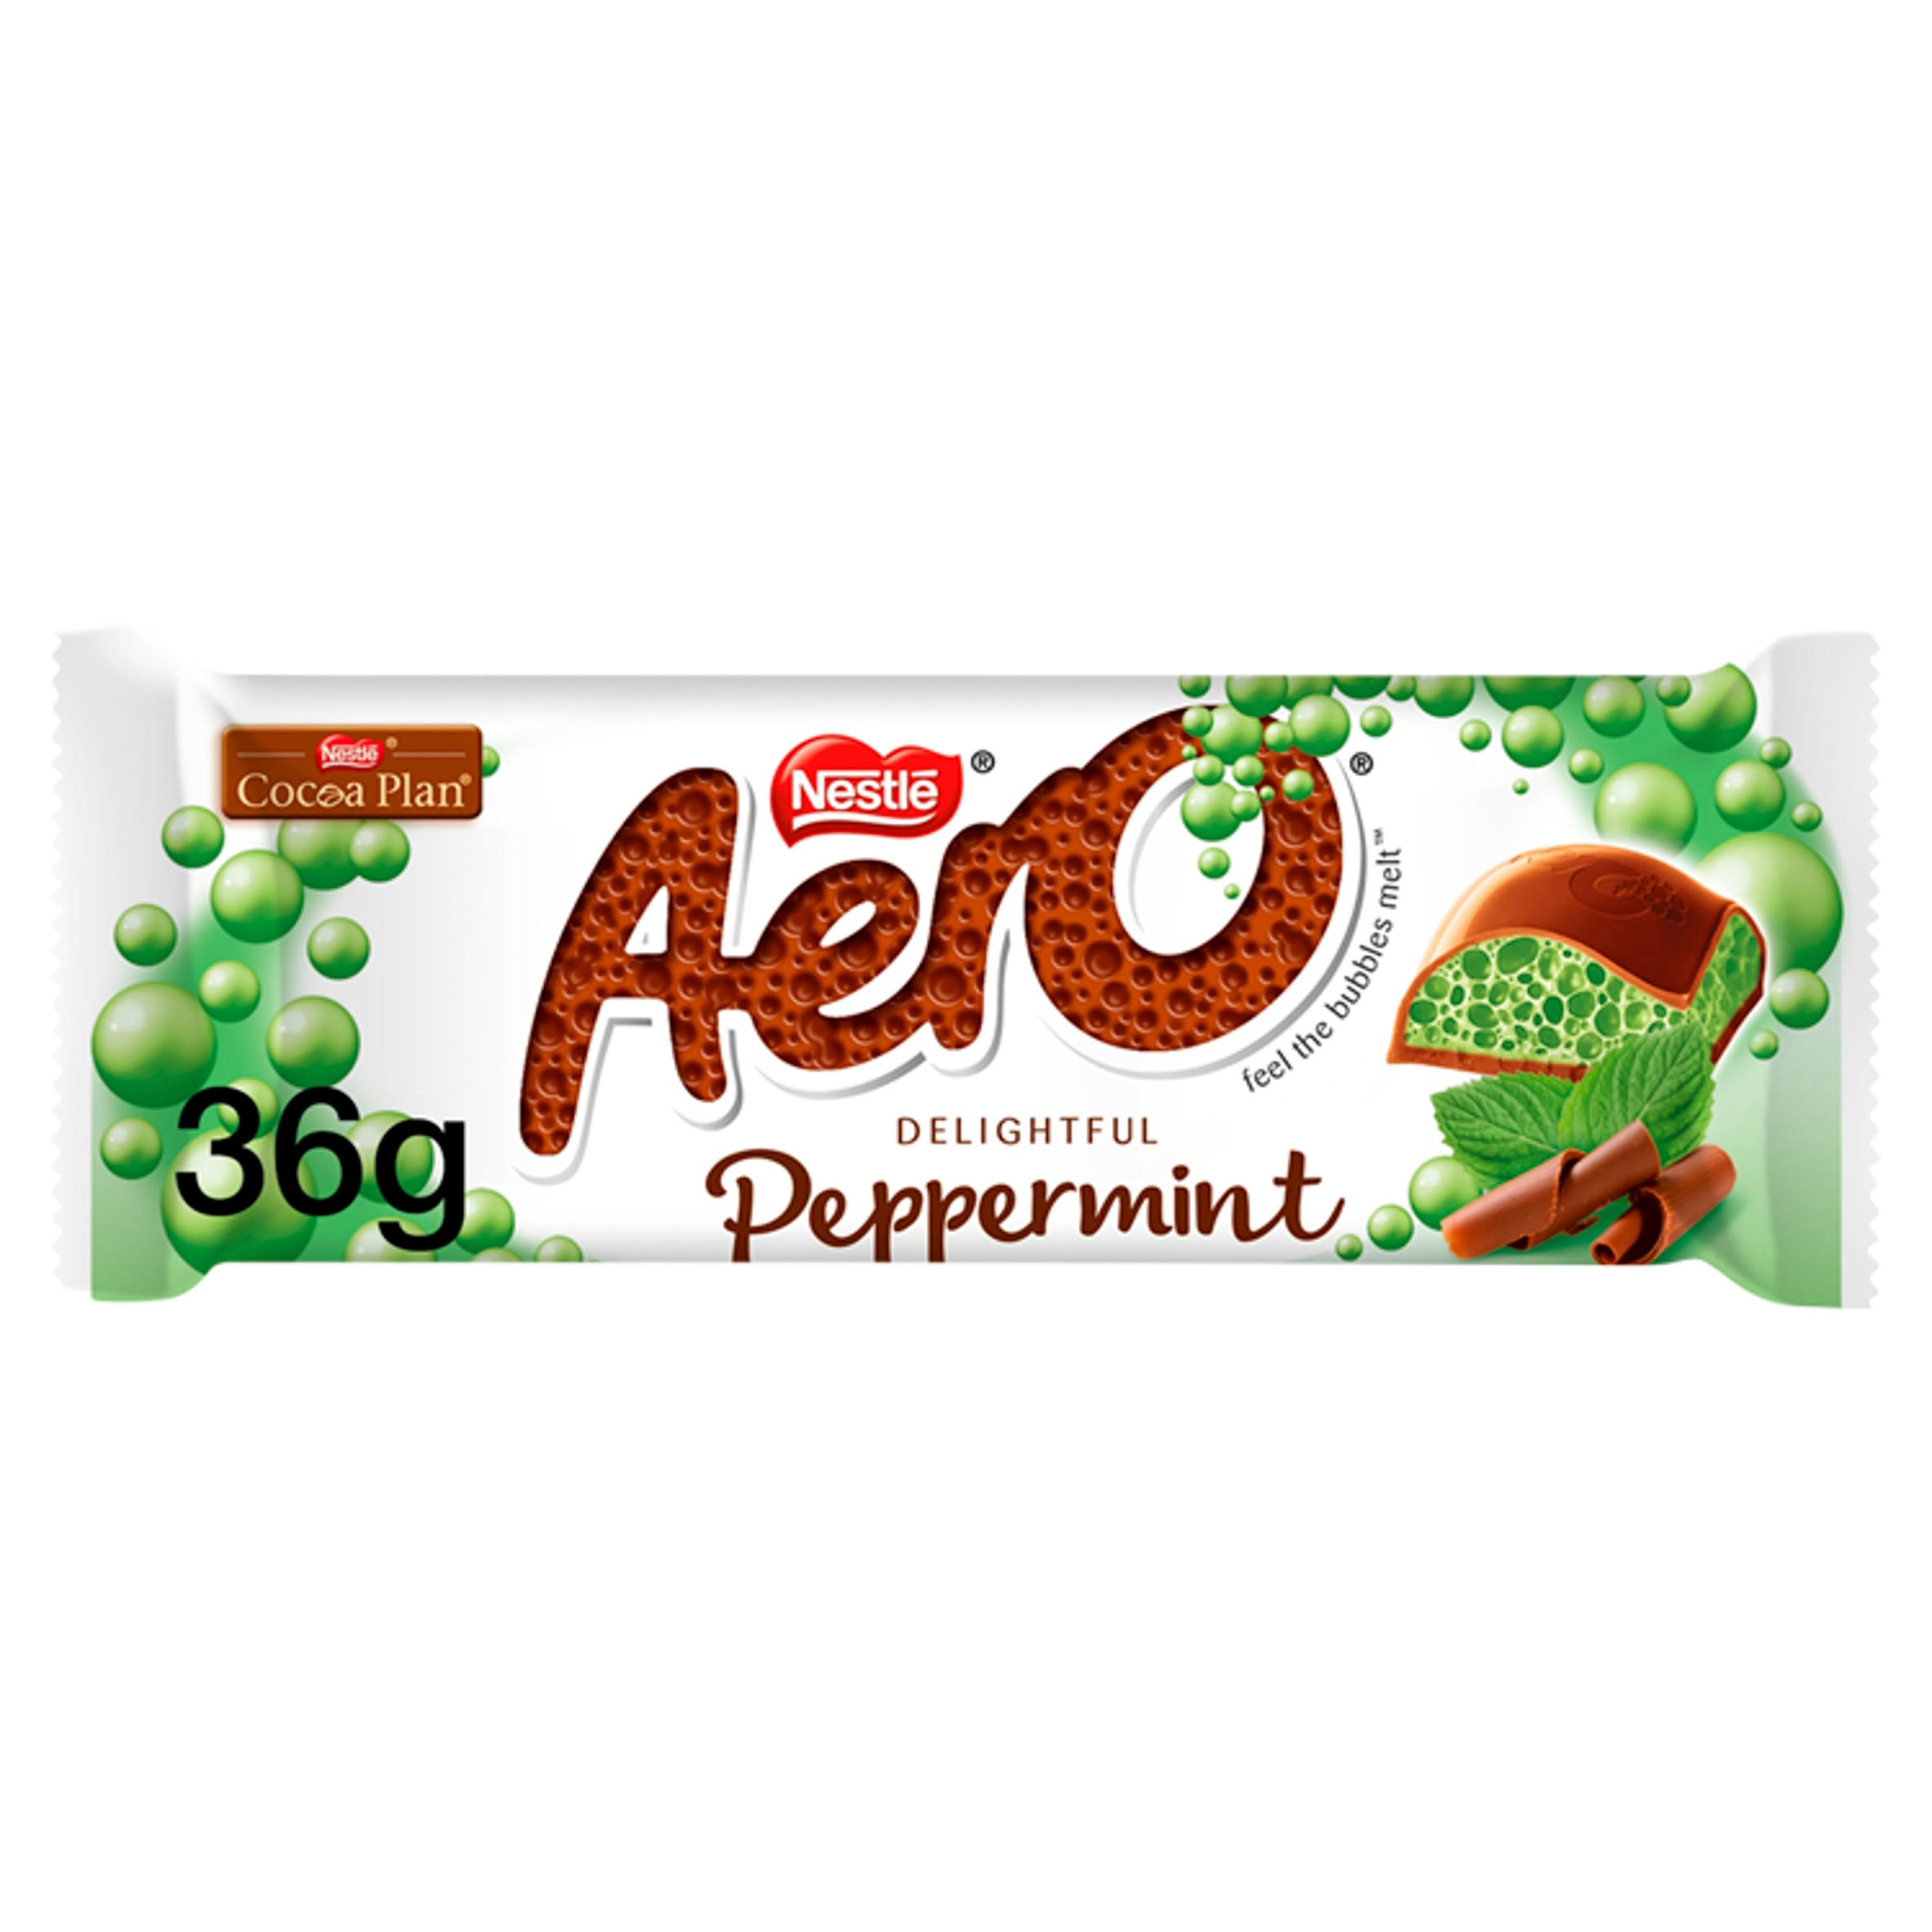 Aero Delightful Peppermint 36g Single Chocolate Bars And Bags Iceland Foods